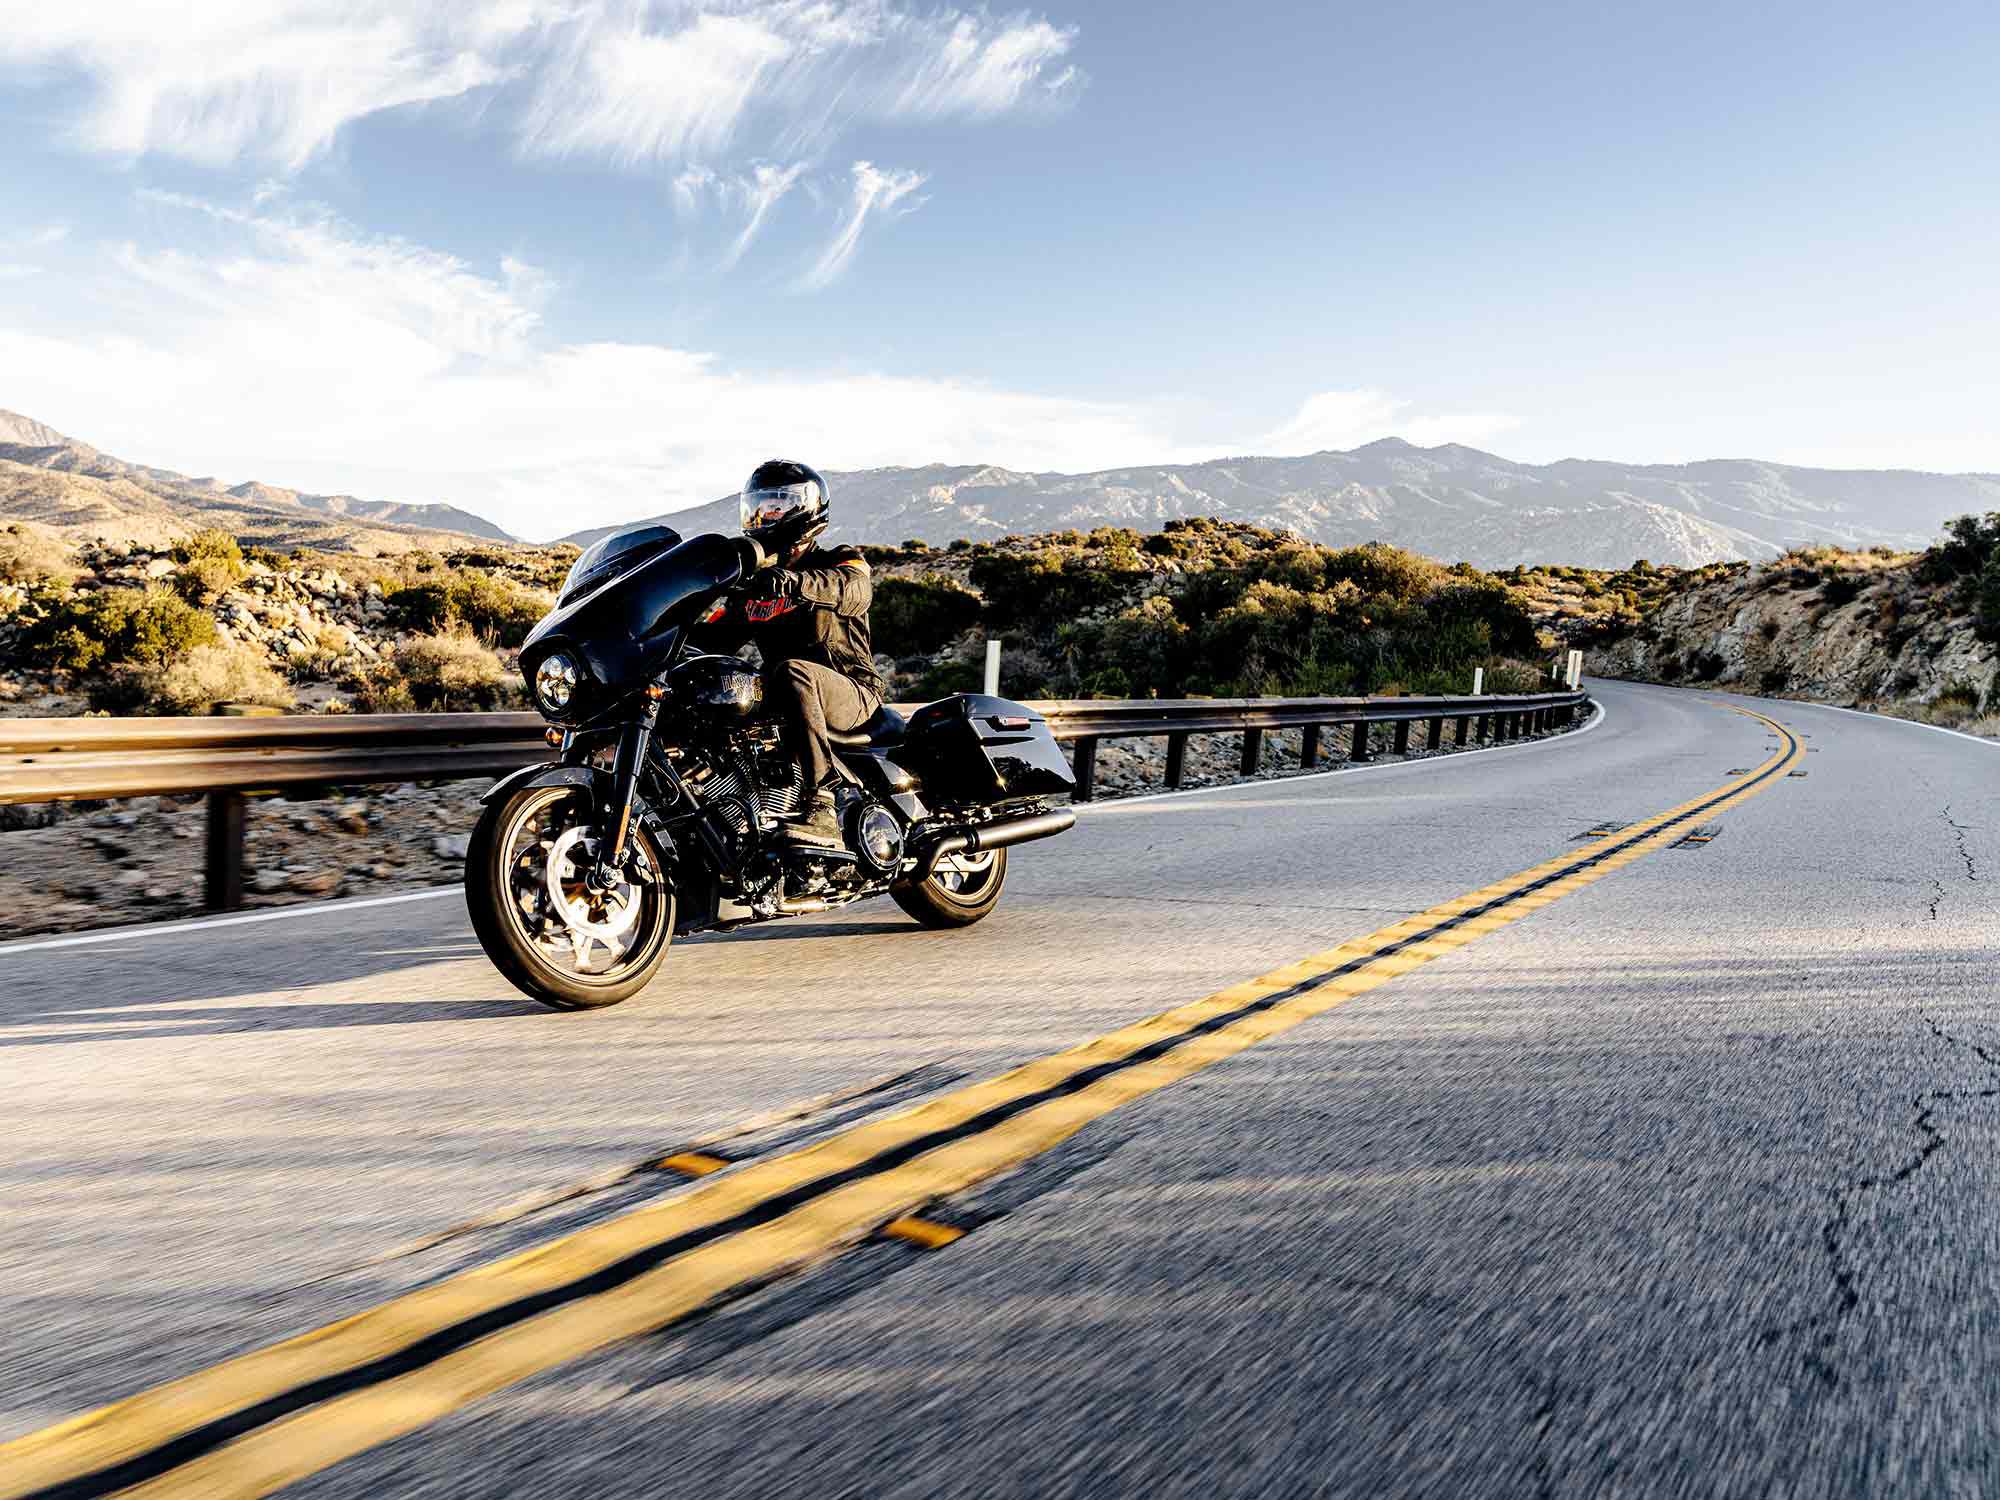 The Street Glide ST packs the largest factory-installed engine Harley provides.